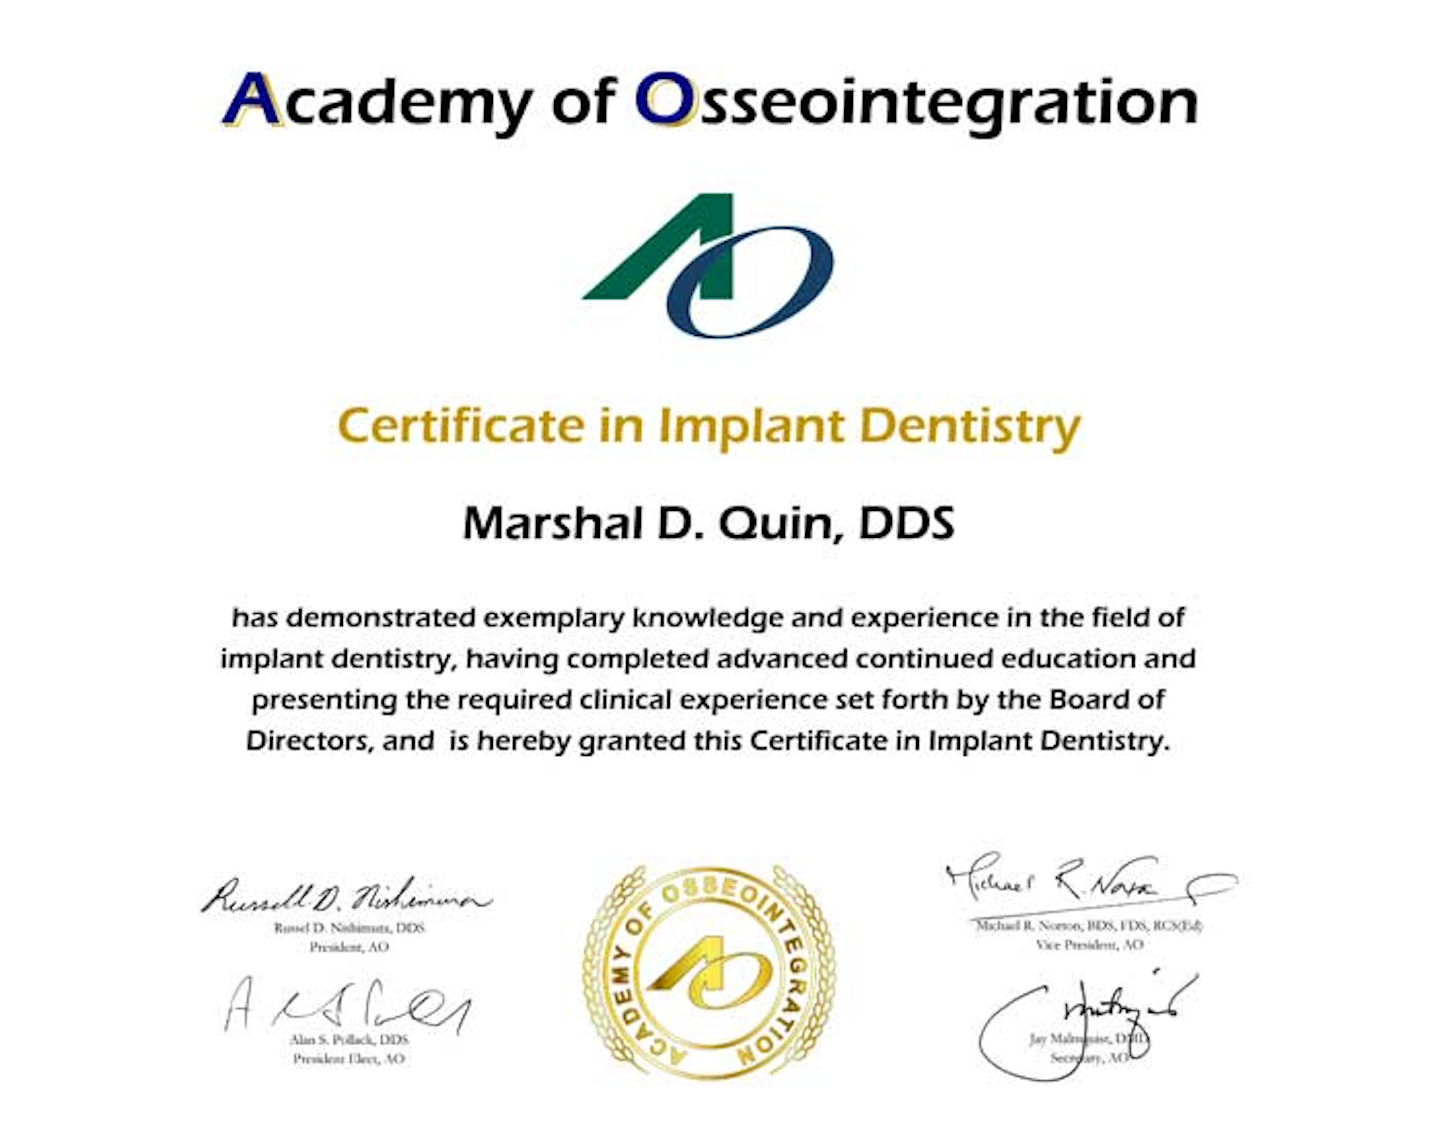 Academy of Osseointegration announces new certificate in implant